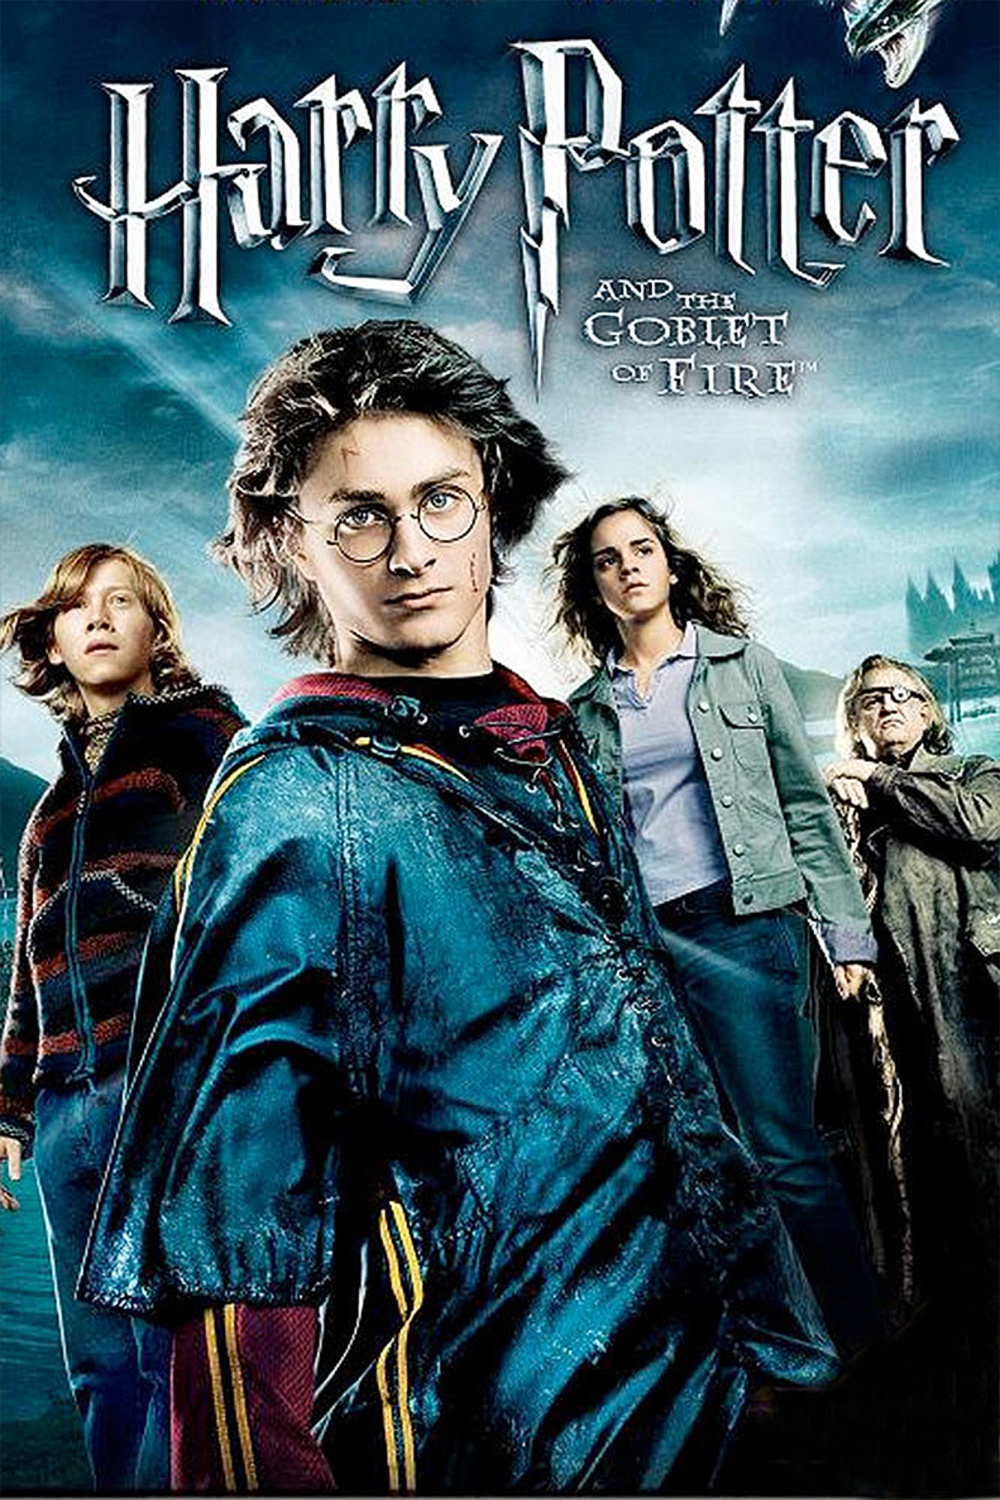 Goblet Of Fire1 